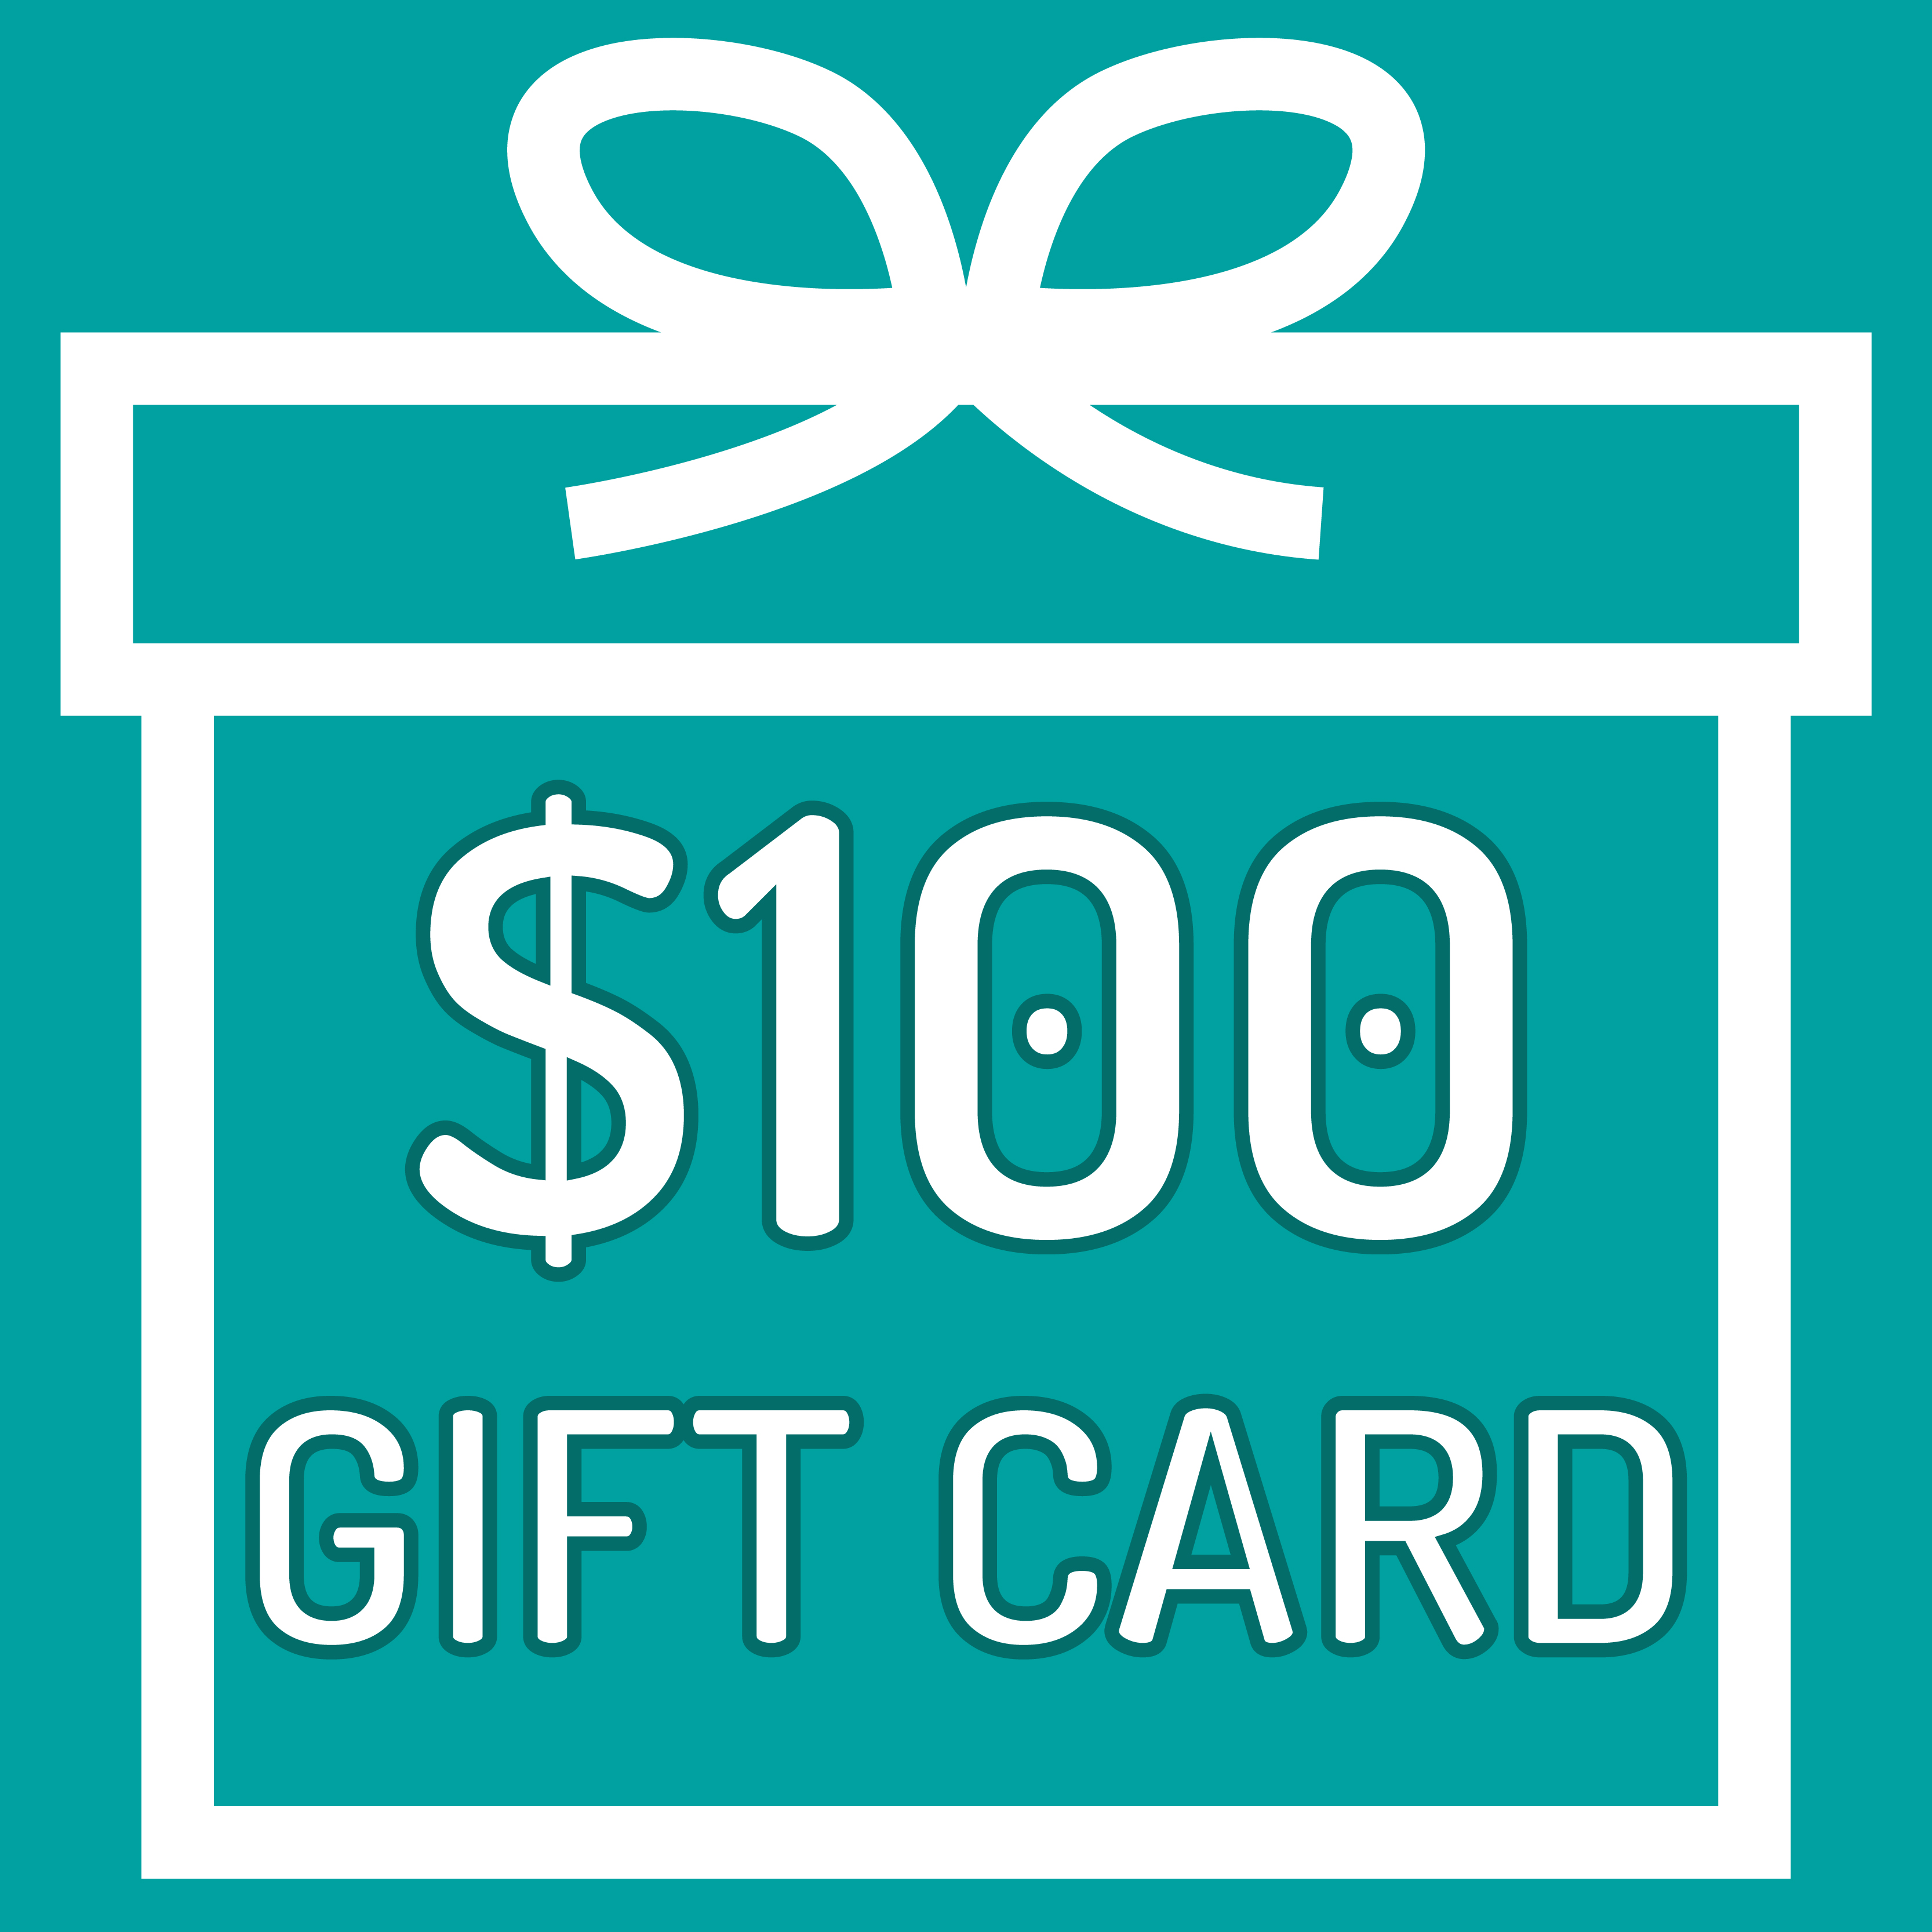 small image of a $100 gift card